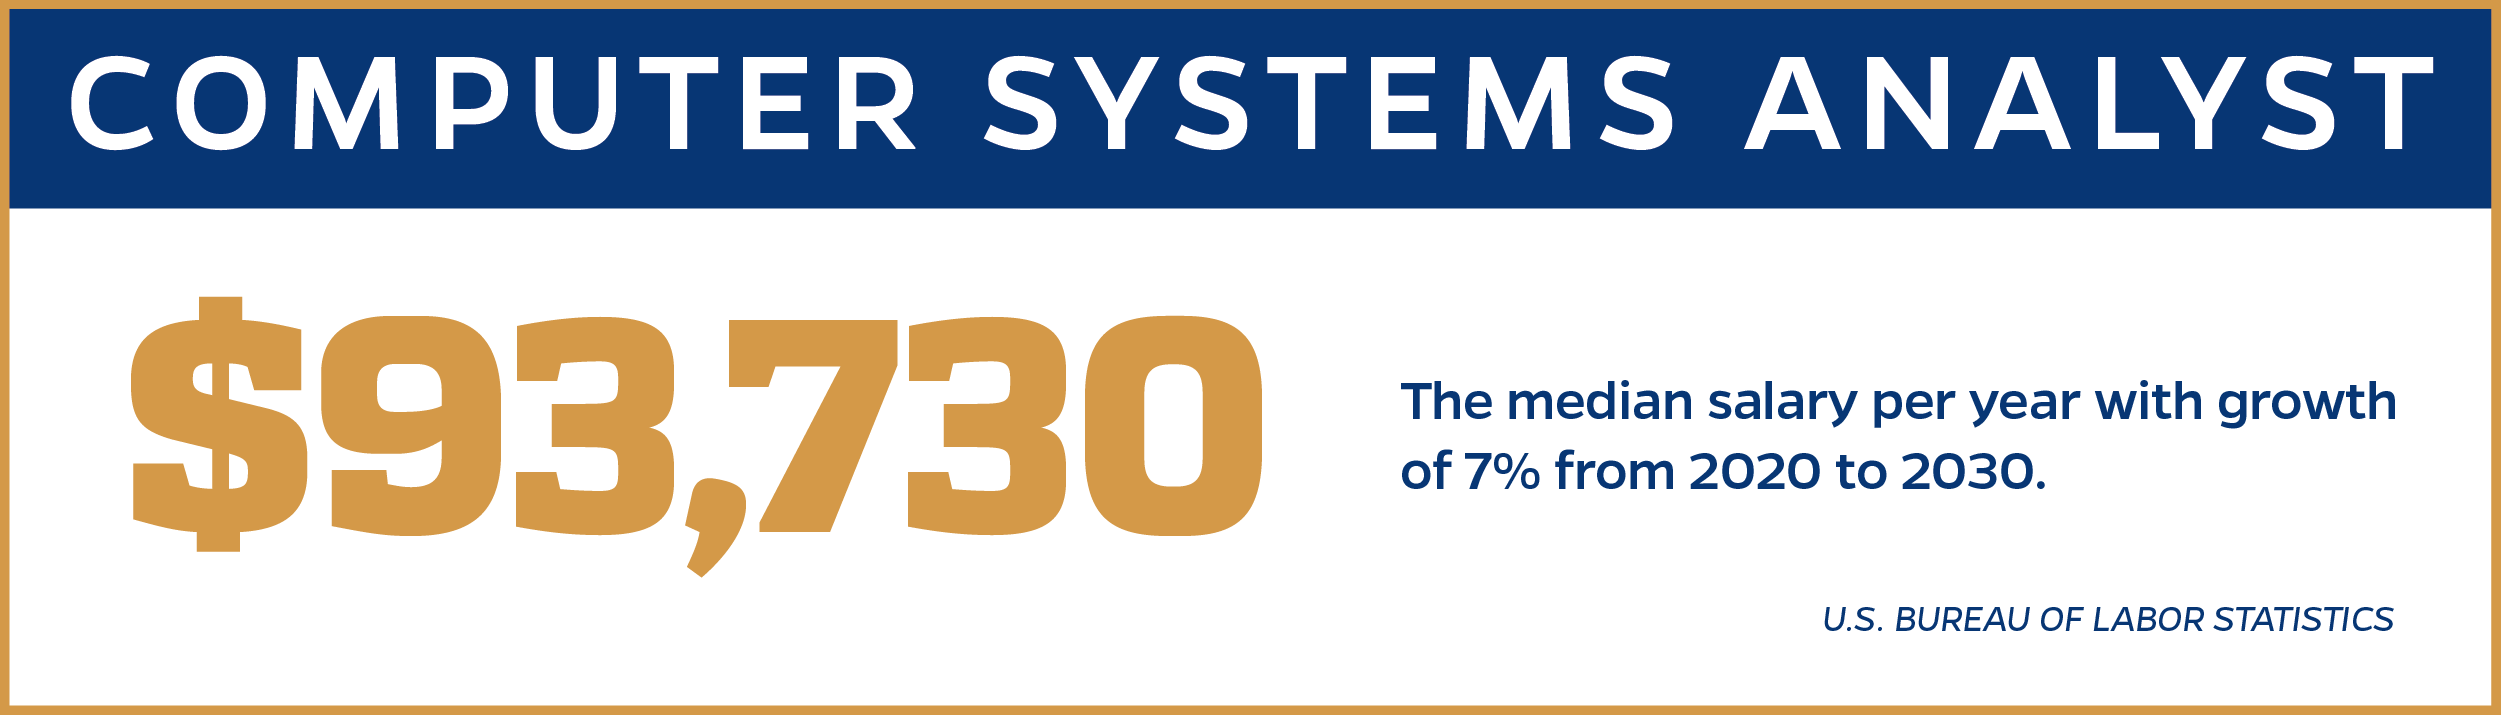 Computer Systems Analyst Infographic-$93,730 the median salary per year with growth of 7% from 2020 to 2030.